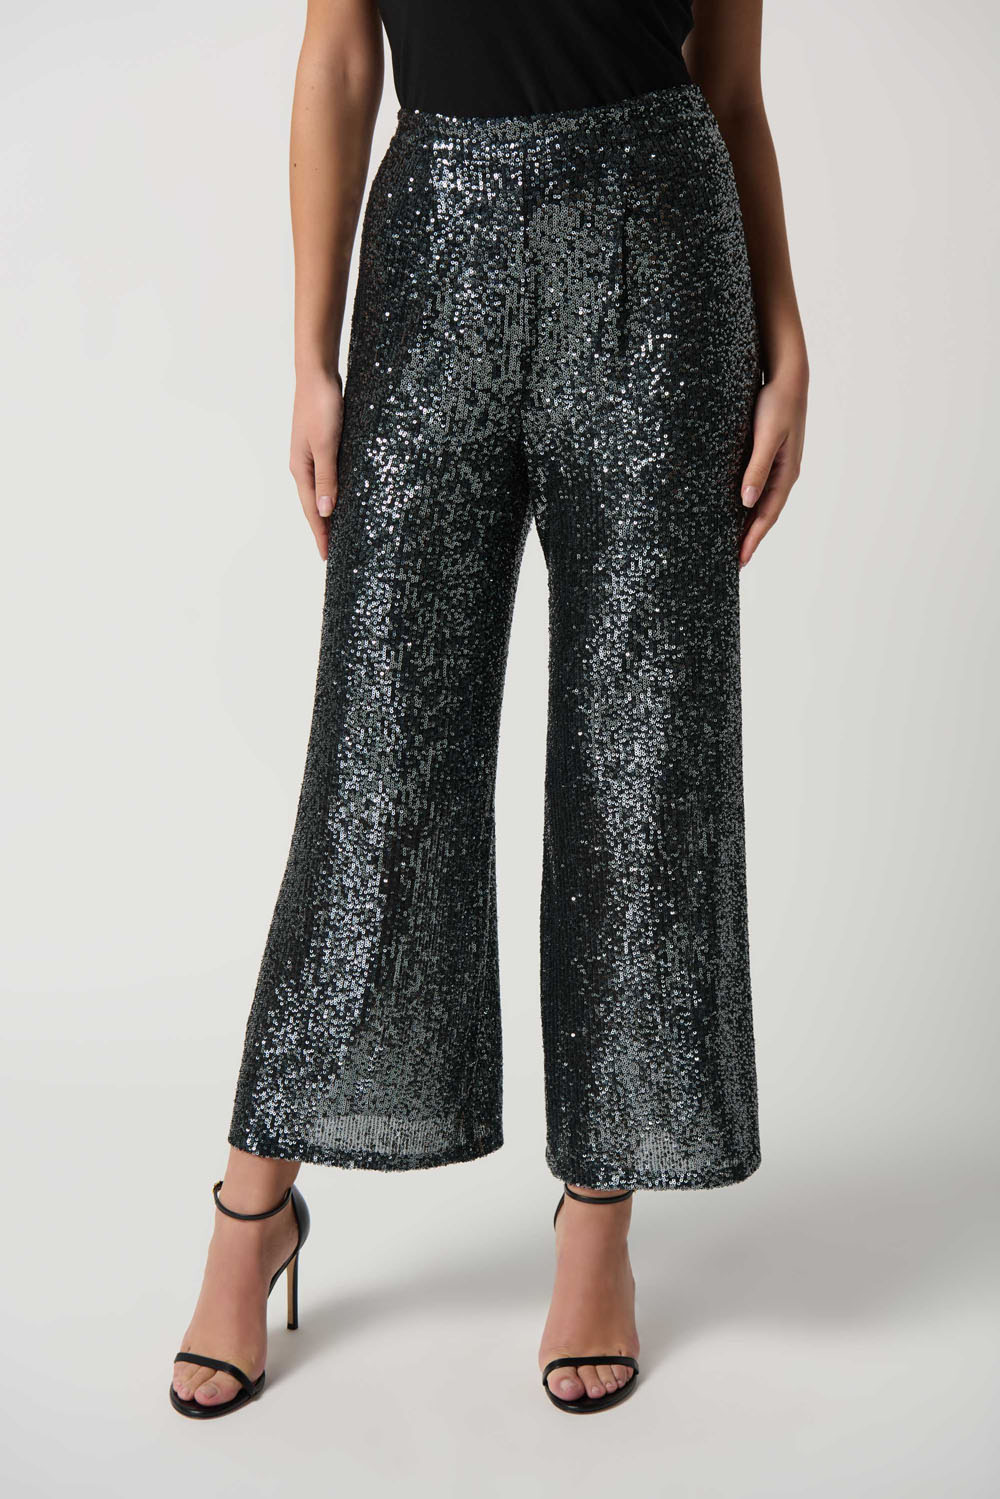 CHICAGO SEQUIN DRAWSTRING PANTS: Mulholland Drive